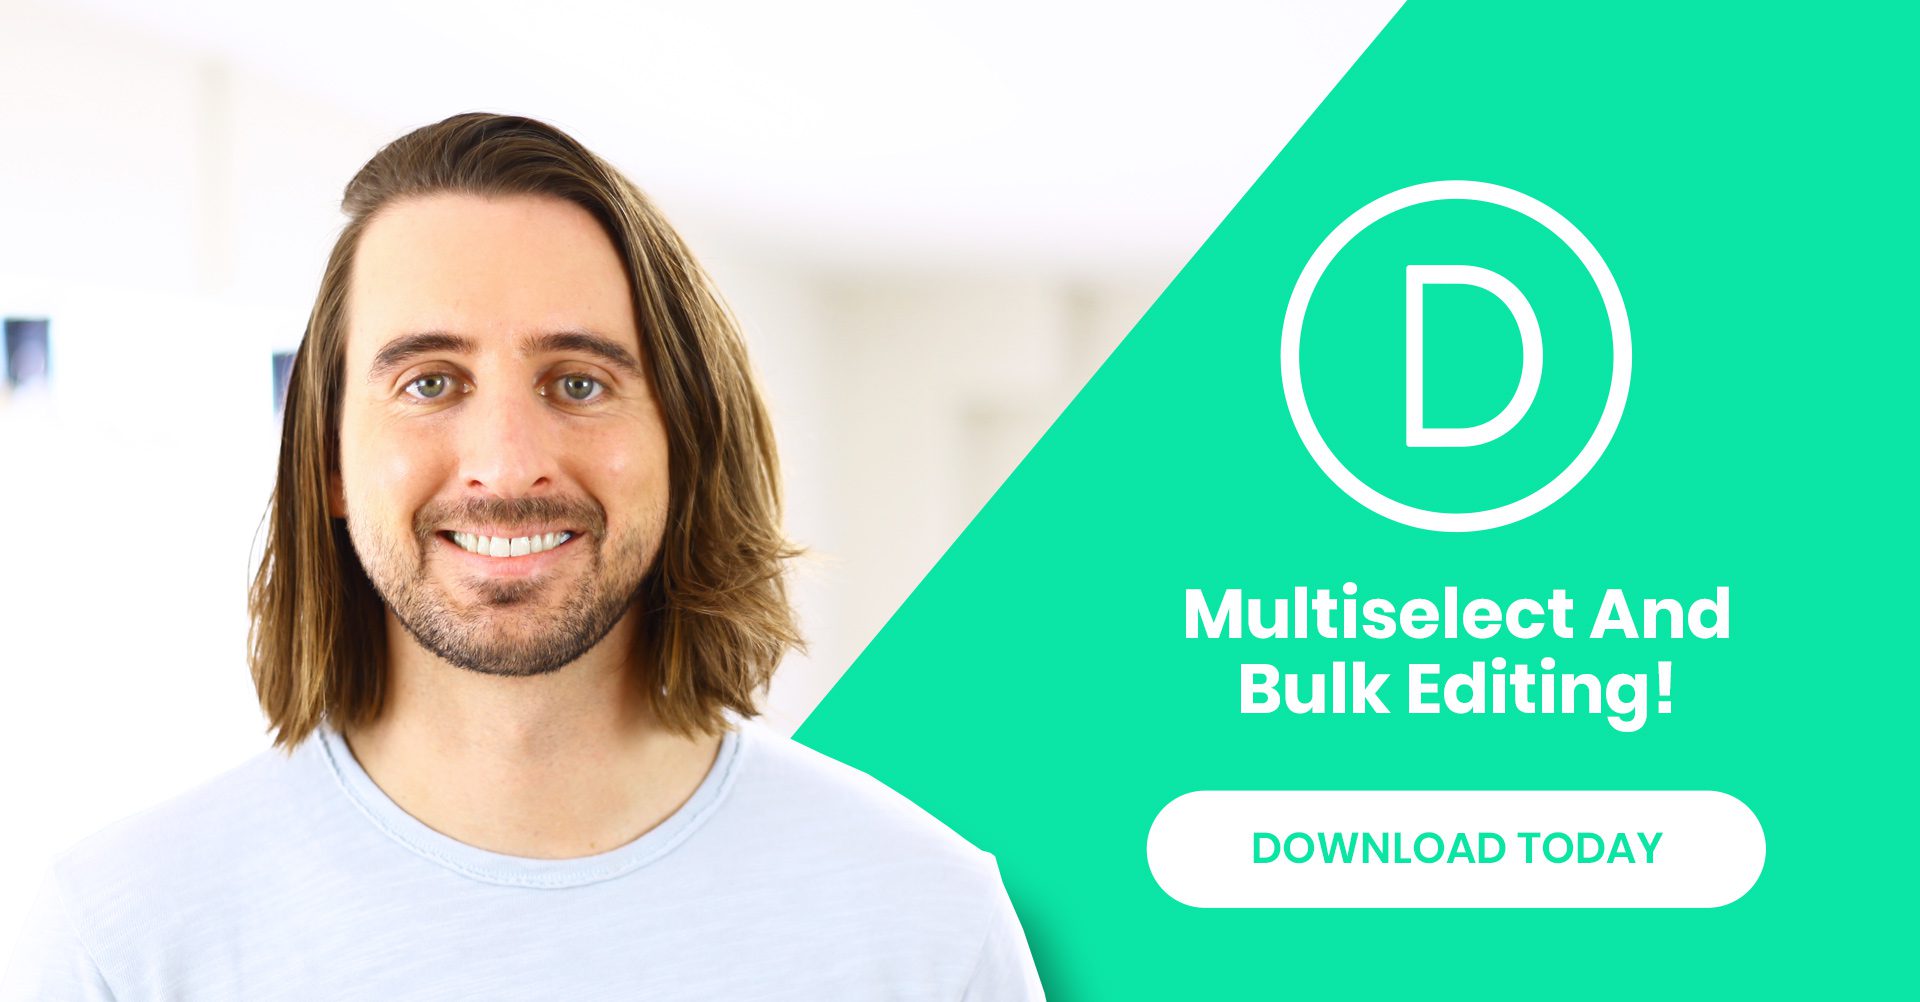 Introducing Bulk Editing And Multiselect For Divi! This Will Change The Way You Build.